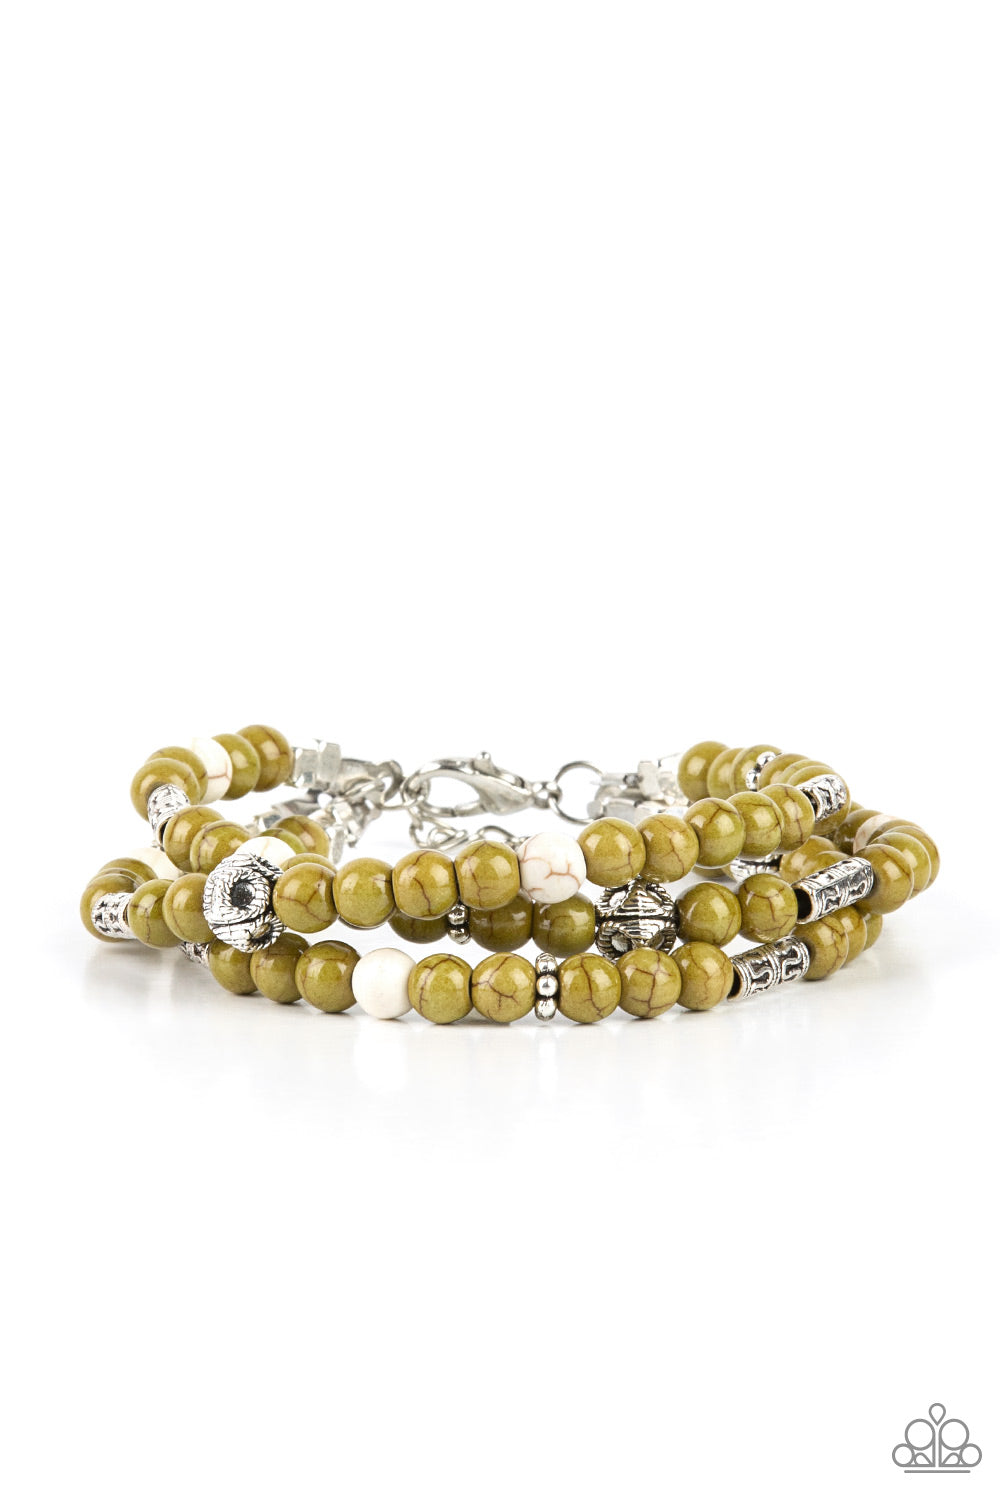 Paparazzi Accessories Desert Decorum - Green Stretchy Bracelets a xollection of Willow and white stone beads, silver cube beads, and ornate silver accents are threaded along invisible bands around the wrist, creating earthy layers. Features an adjustable clasp closure.  Sold as one individual bracelet.  Paparazzi Jewelry is lead and nickel free so it's perfect for sensitive skin too!